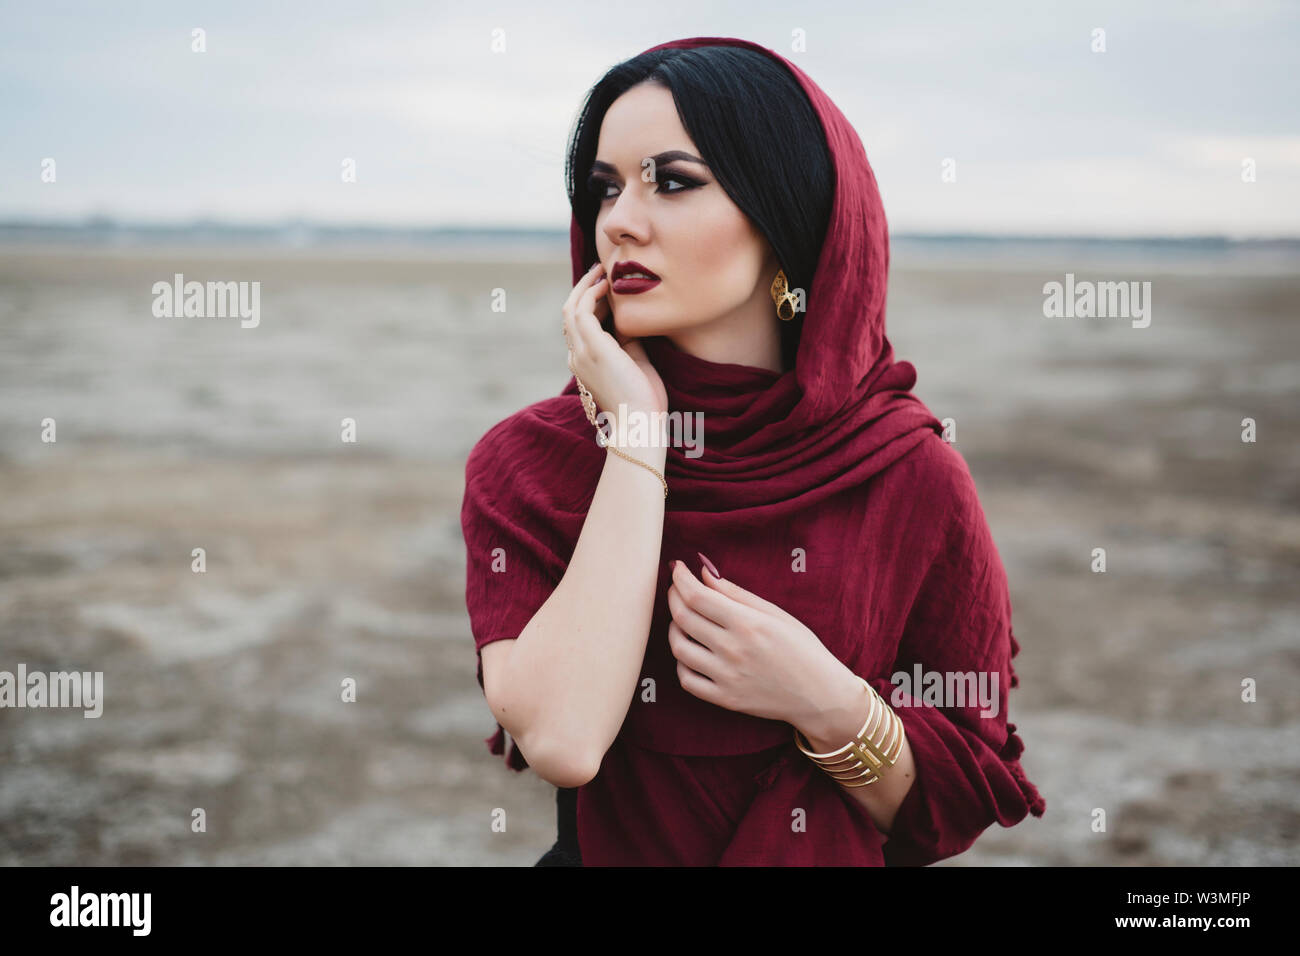 Woman wearing red headscarf and lipstick Stock Photo